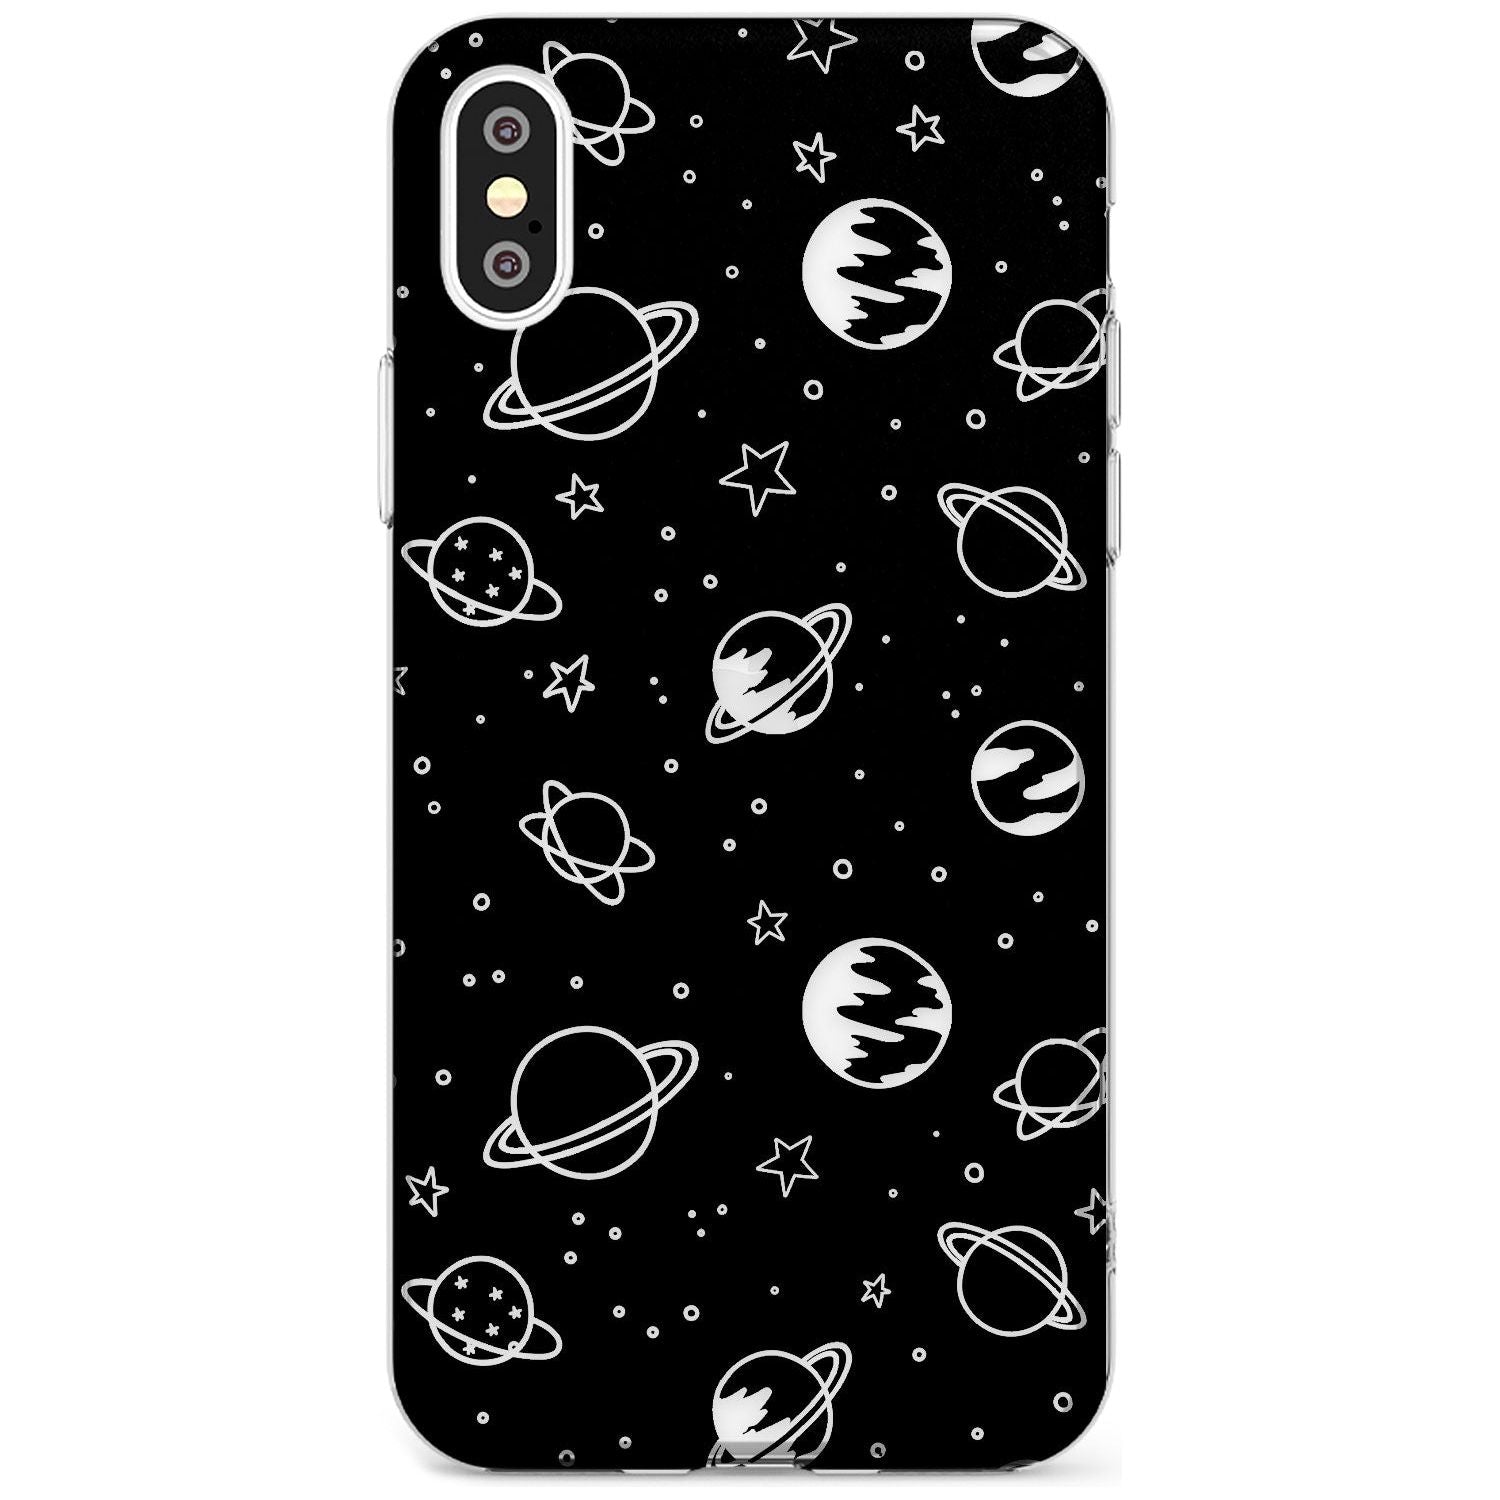 Outer Space Outlines: Clear on Black Black Impact Phone Case for iPhone X XS Max XR